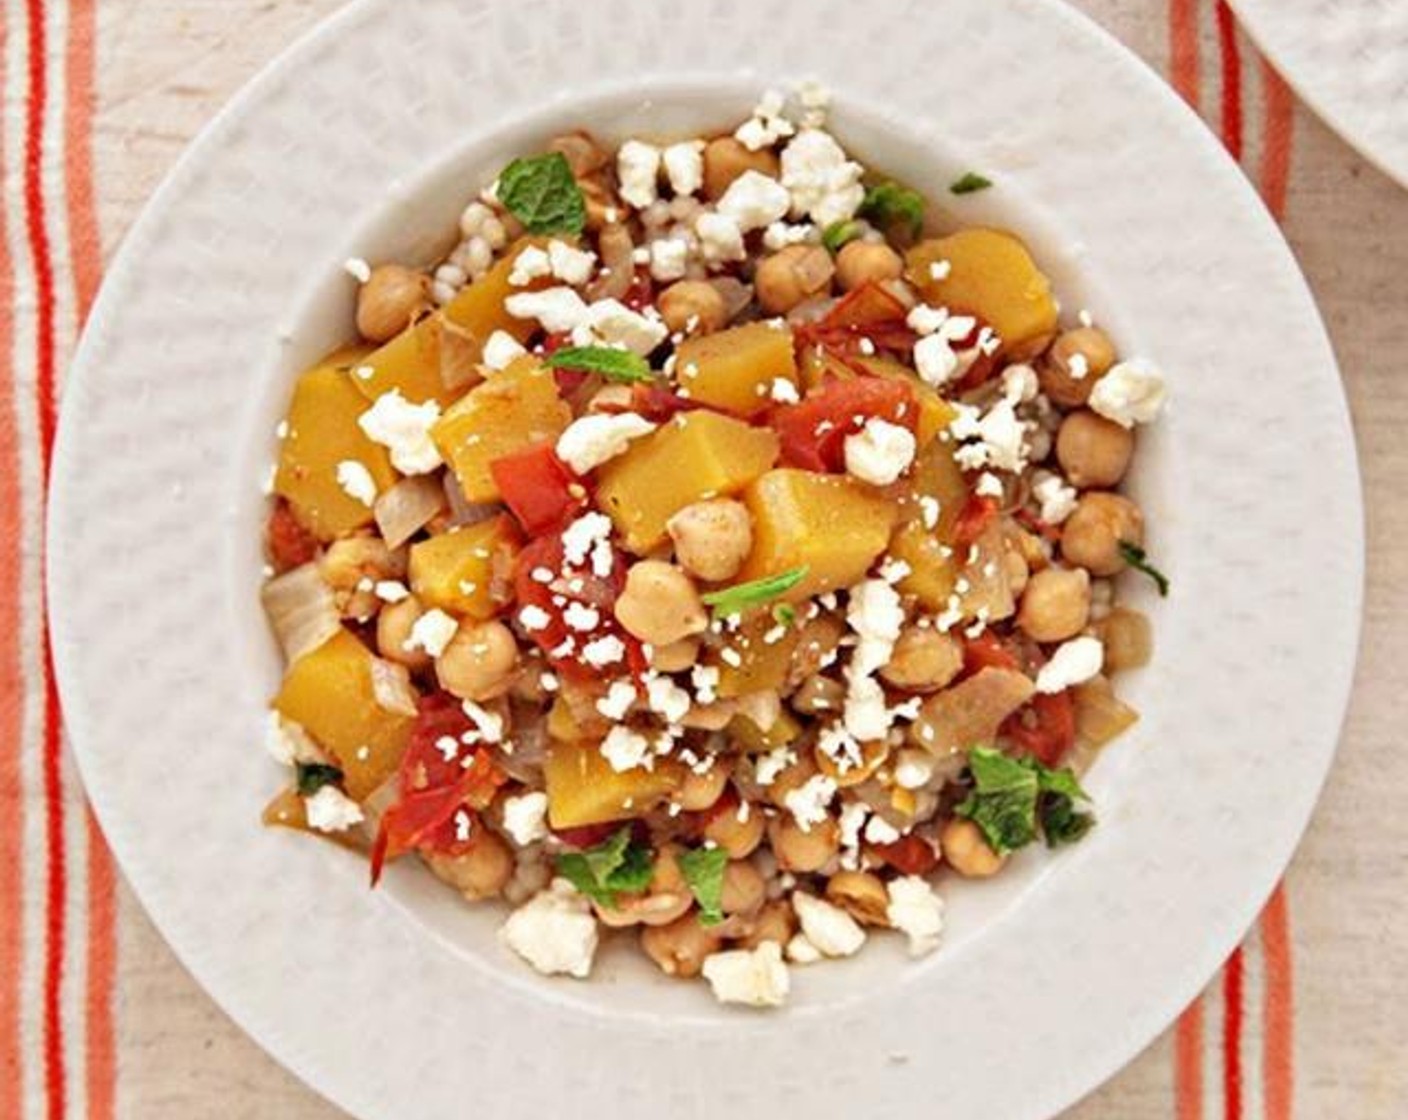 Acorn Squash and Chickpea Stew over Couscous